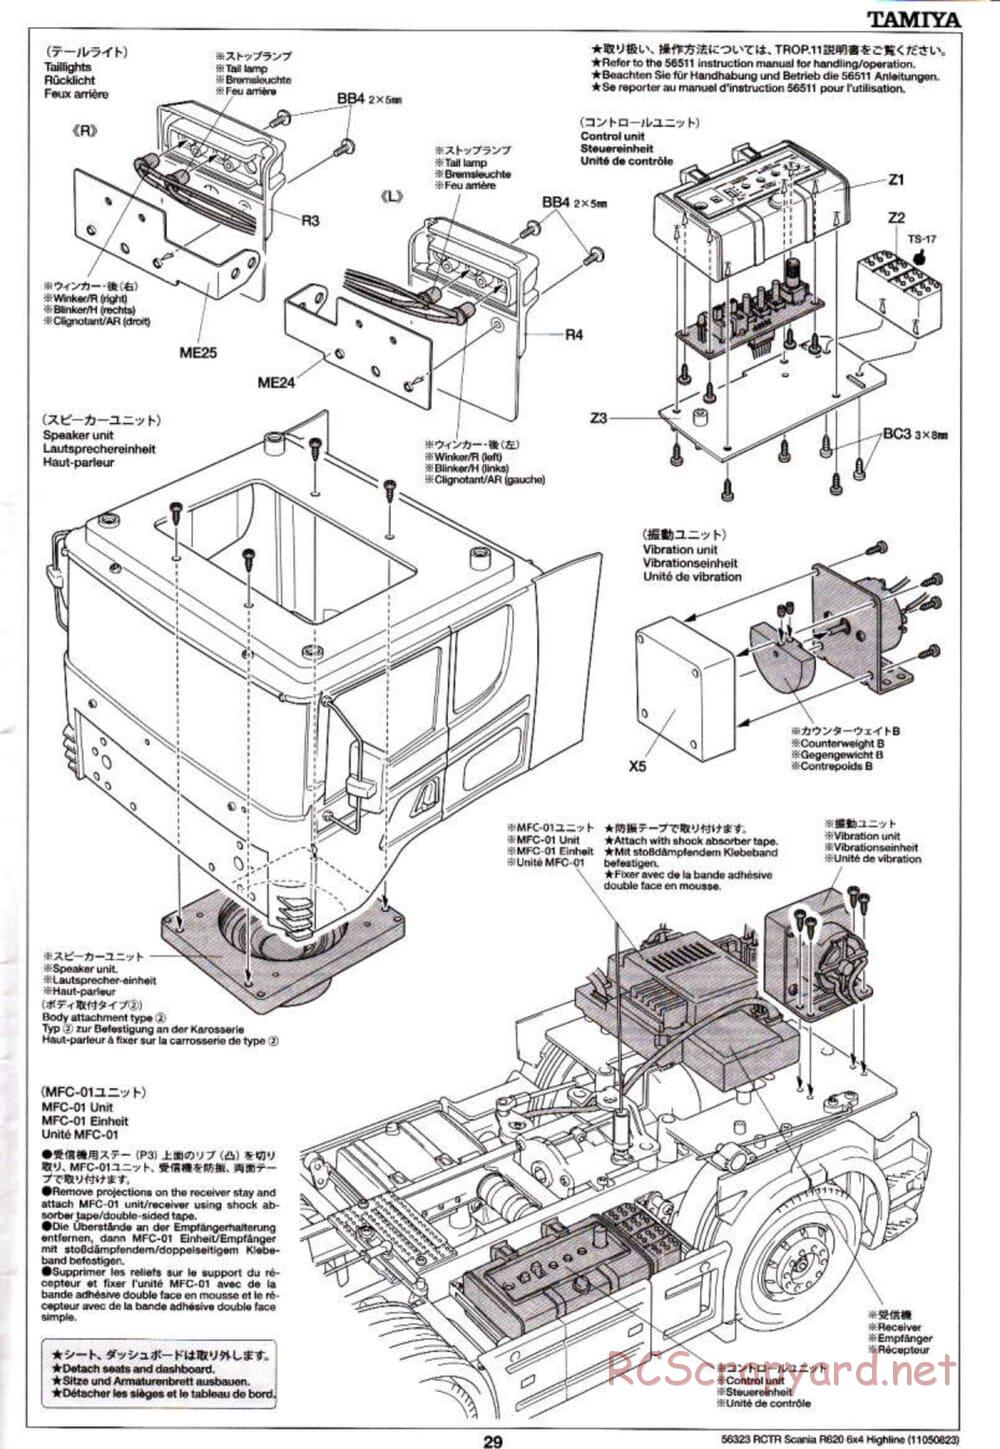 Tamiya - Scania R620 6x4 Highline Tractor Truck Chassis - Manual - Page 29